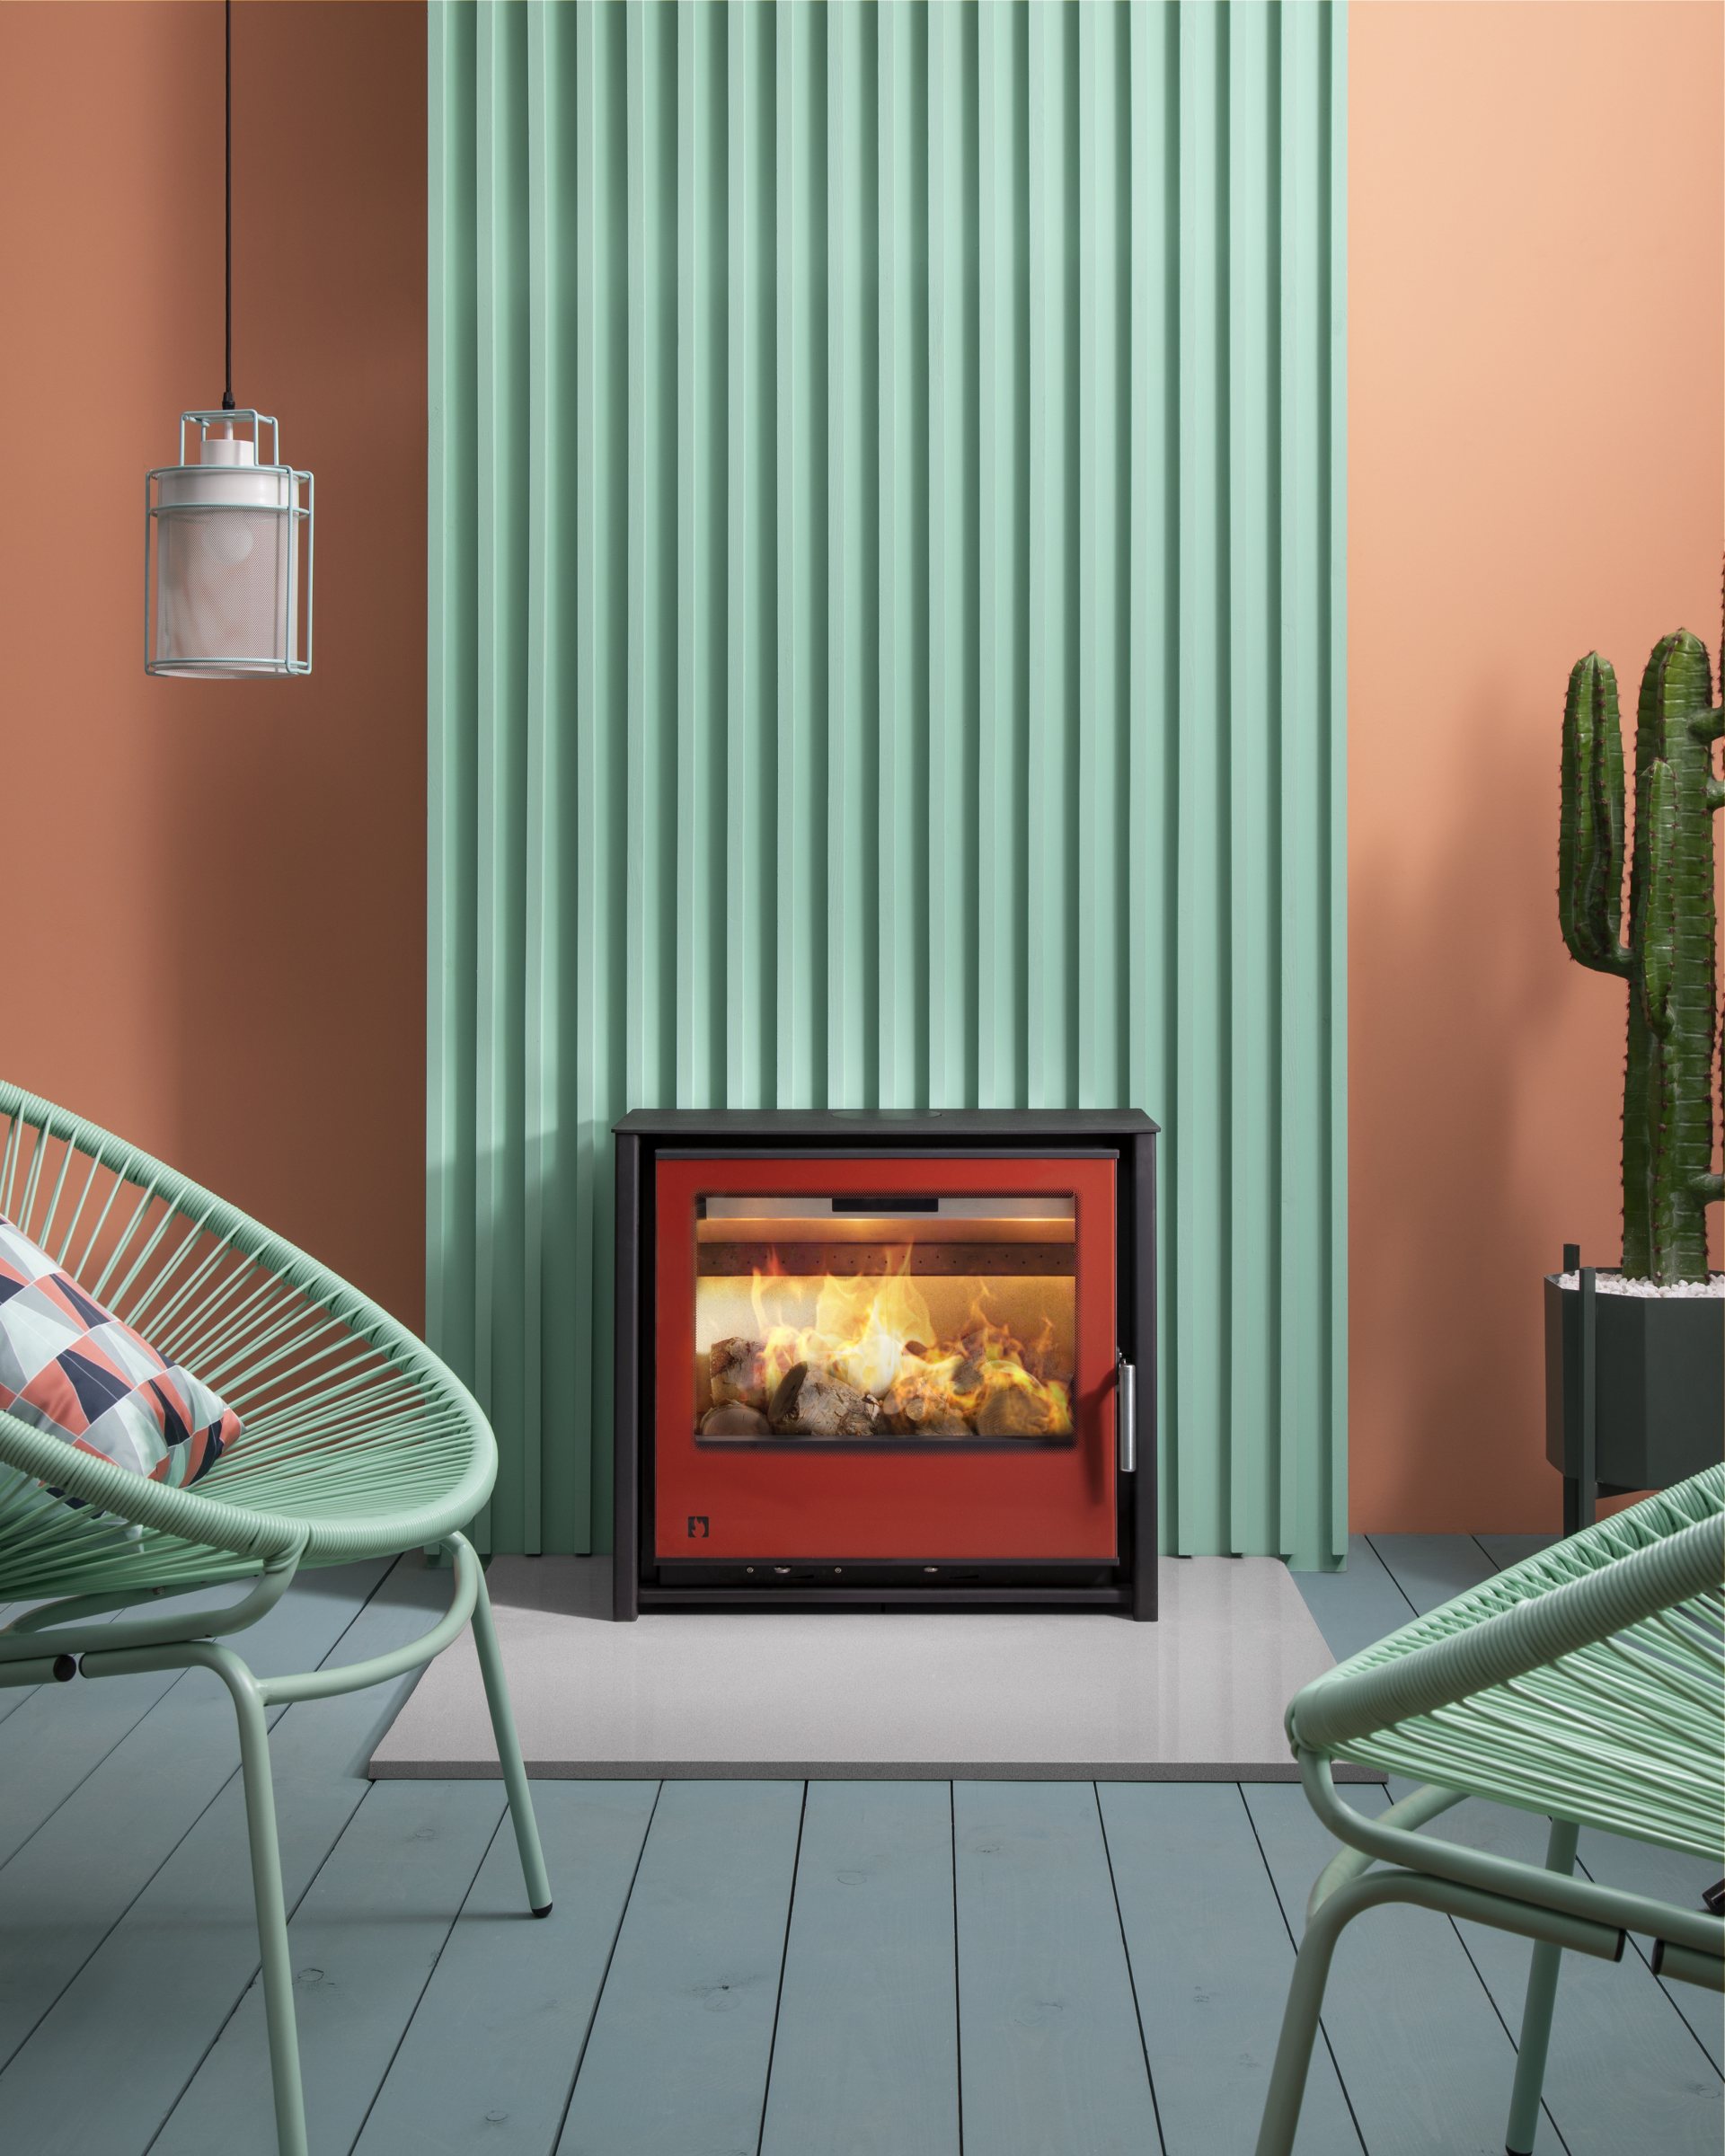 Arada i600 Slimline Freestanding Low stove in Spice red in stylish contemporary pastel-coloured room